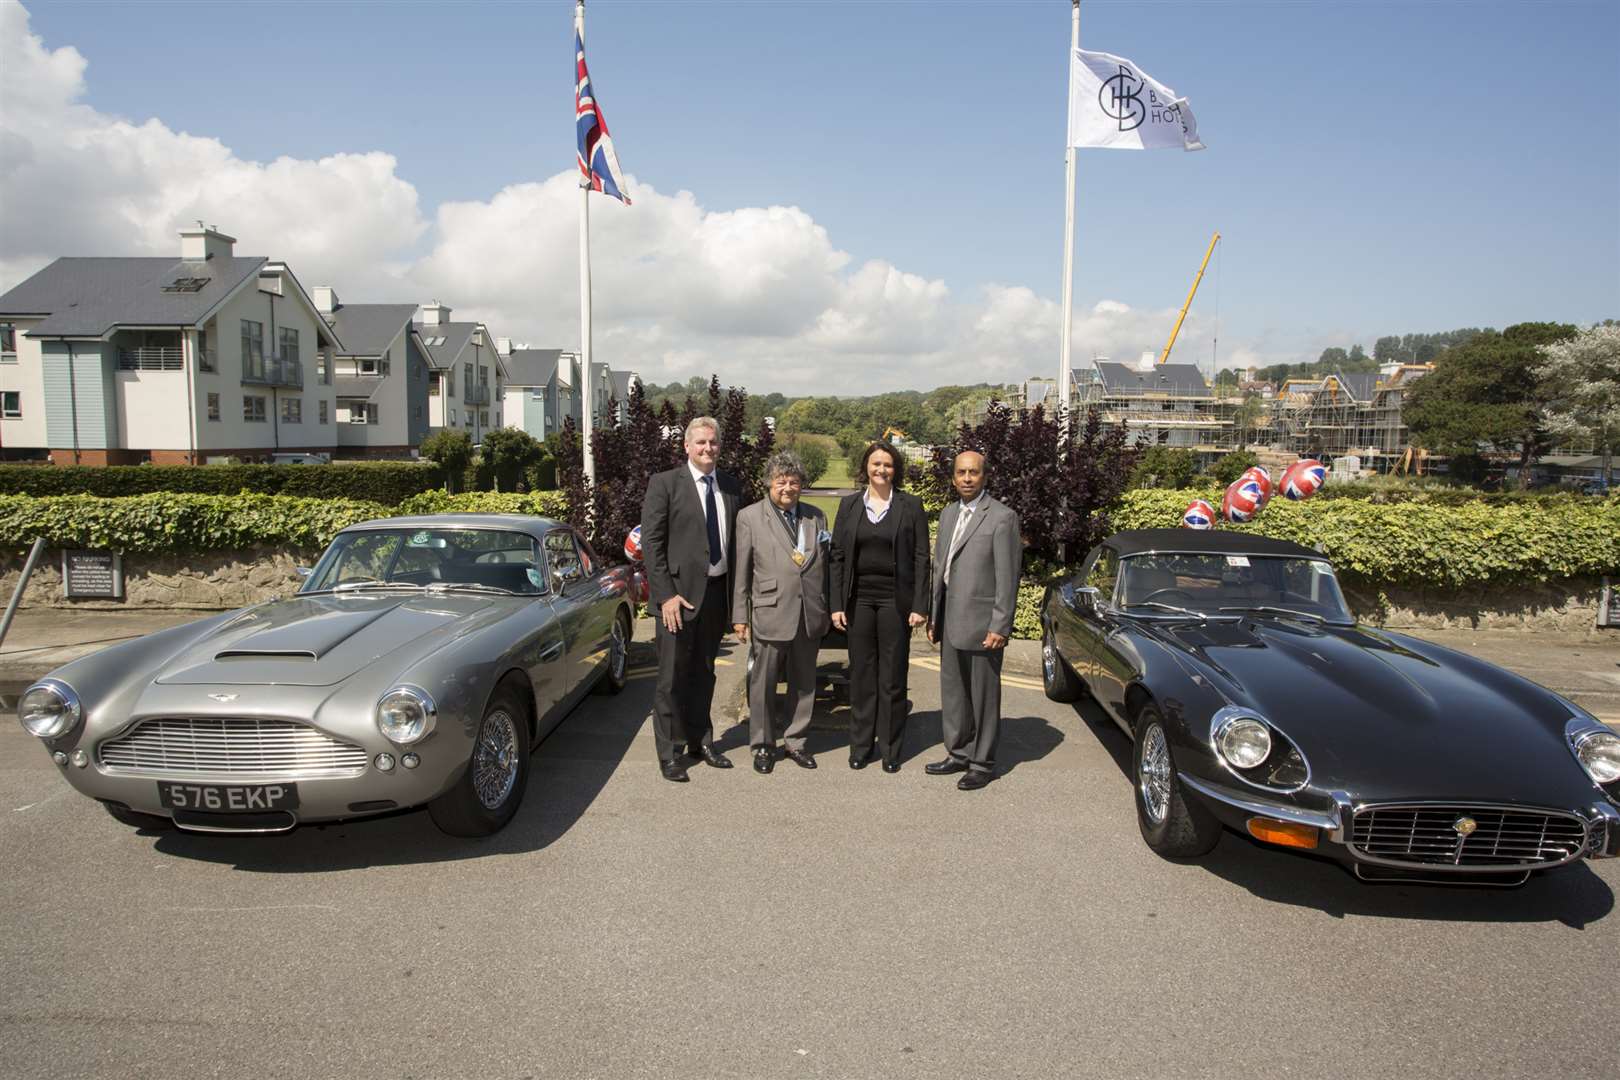 Darrell Healey, chairman of GSE Group, Michael Lyons, the Mayor of Hythe, Denise Vas, general manager of the Hythe Imperial; and Len Louis, chief executive of Classic British Hotels.